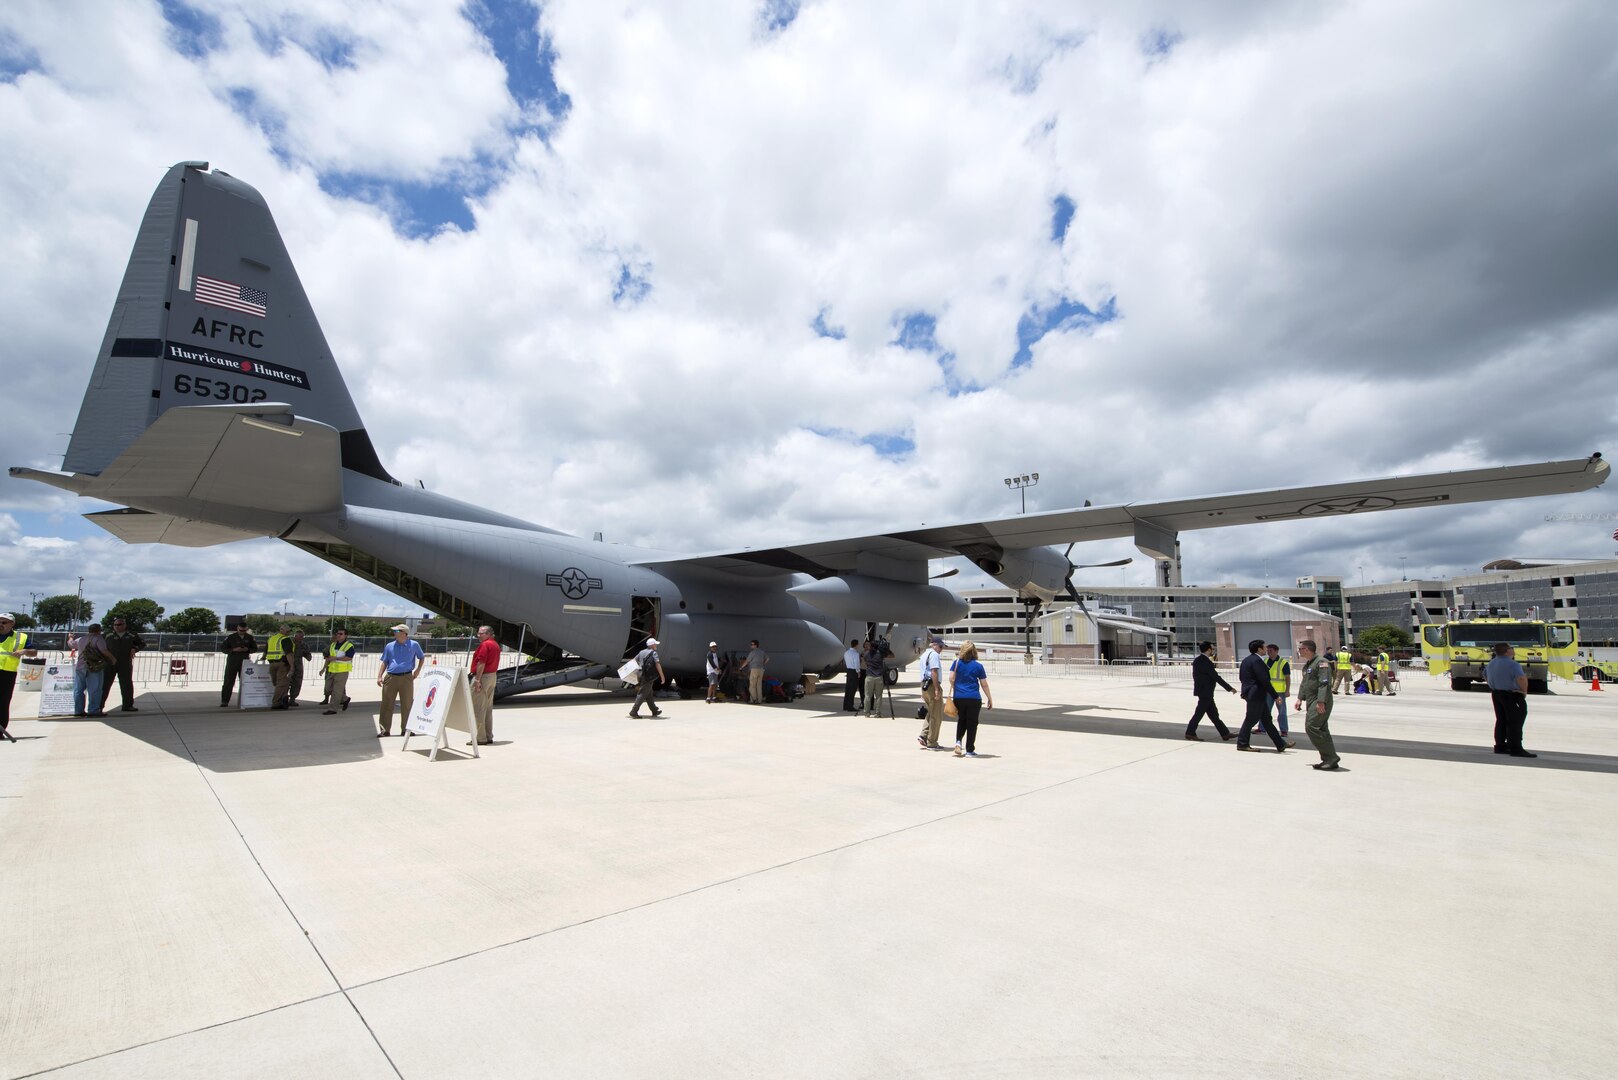 Members of media and the public tour a WC-130J Hercules from the 53rd Weather Reconnaissance Squadron at Keesler Air Force Base, Miss., during the Hurricane Awareness Tour at the San Antonio International Airport May 16, 2016. The aircraft, one of 10 at the 53rd WRS, is used to fly directly into hurricanes to collect weather data such as wind speed, temperature, humidity and air pressure.